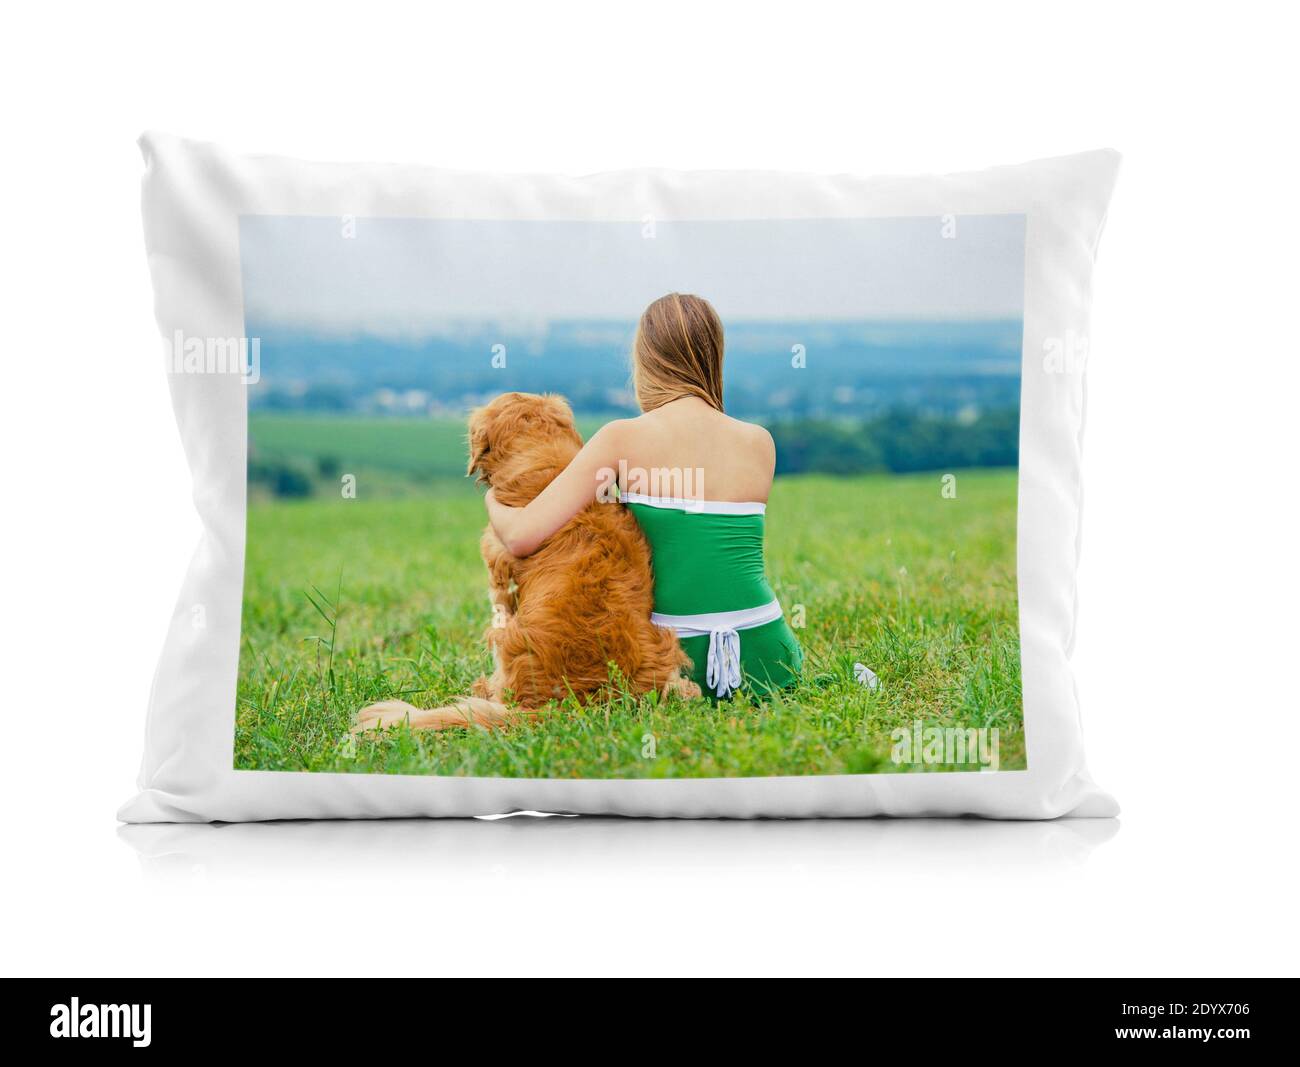 White pillowcase with personal print isolated on a white background Stock Photo